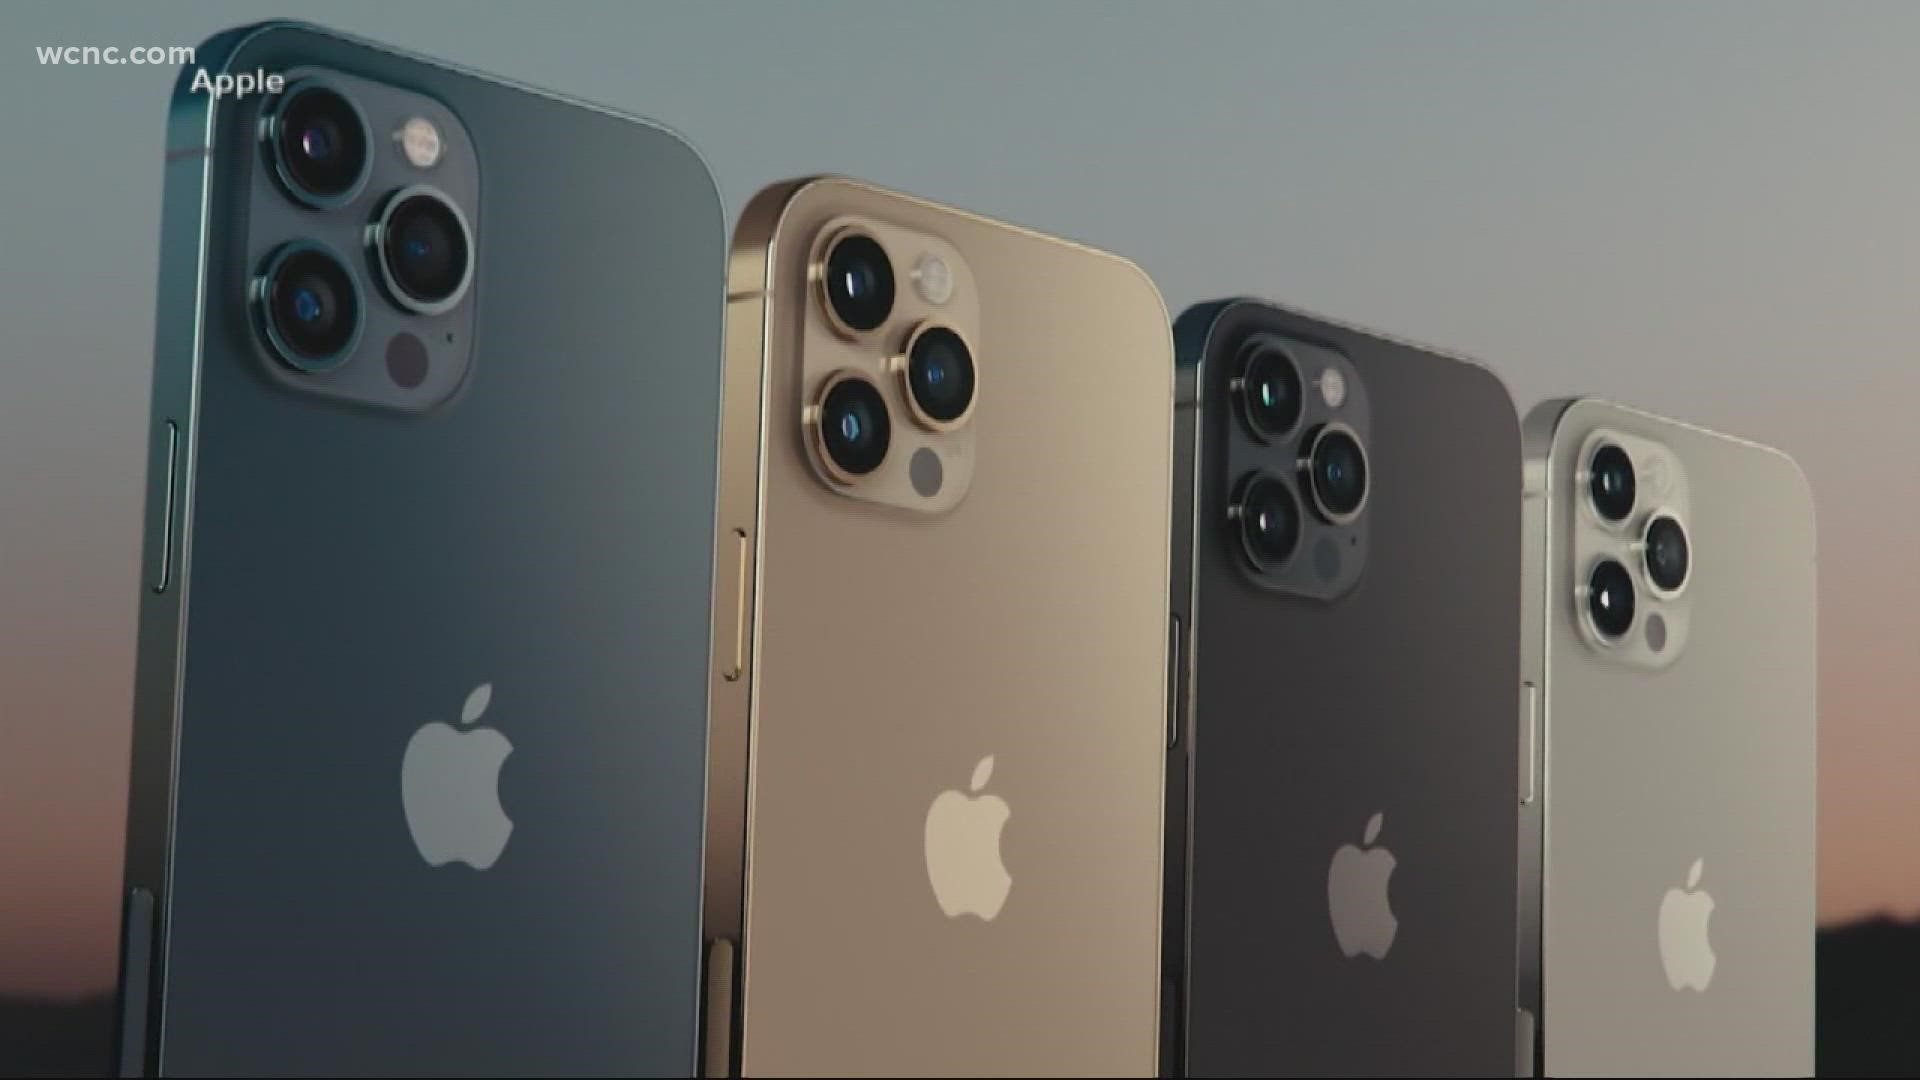 WCNC Charlotte has talked with tech insiders to learn more about the new iPhone so that people can make an informed choice.